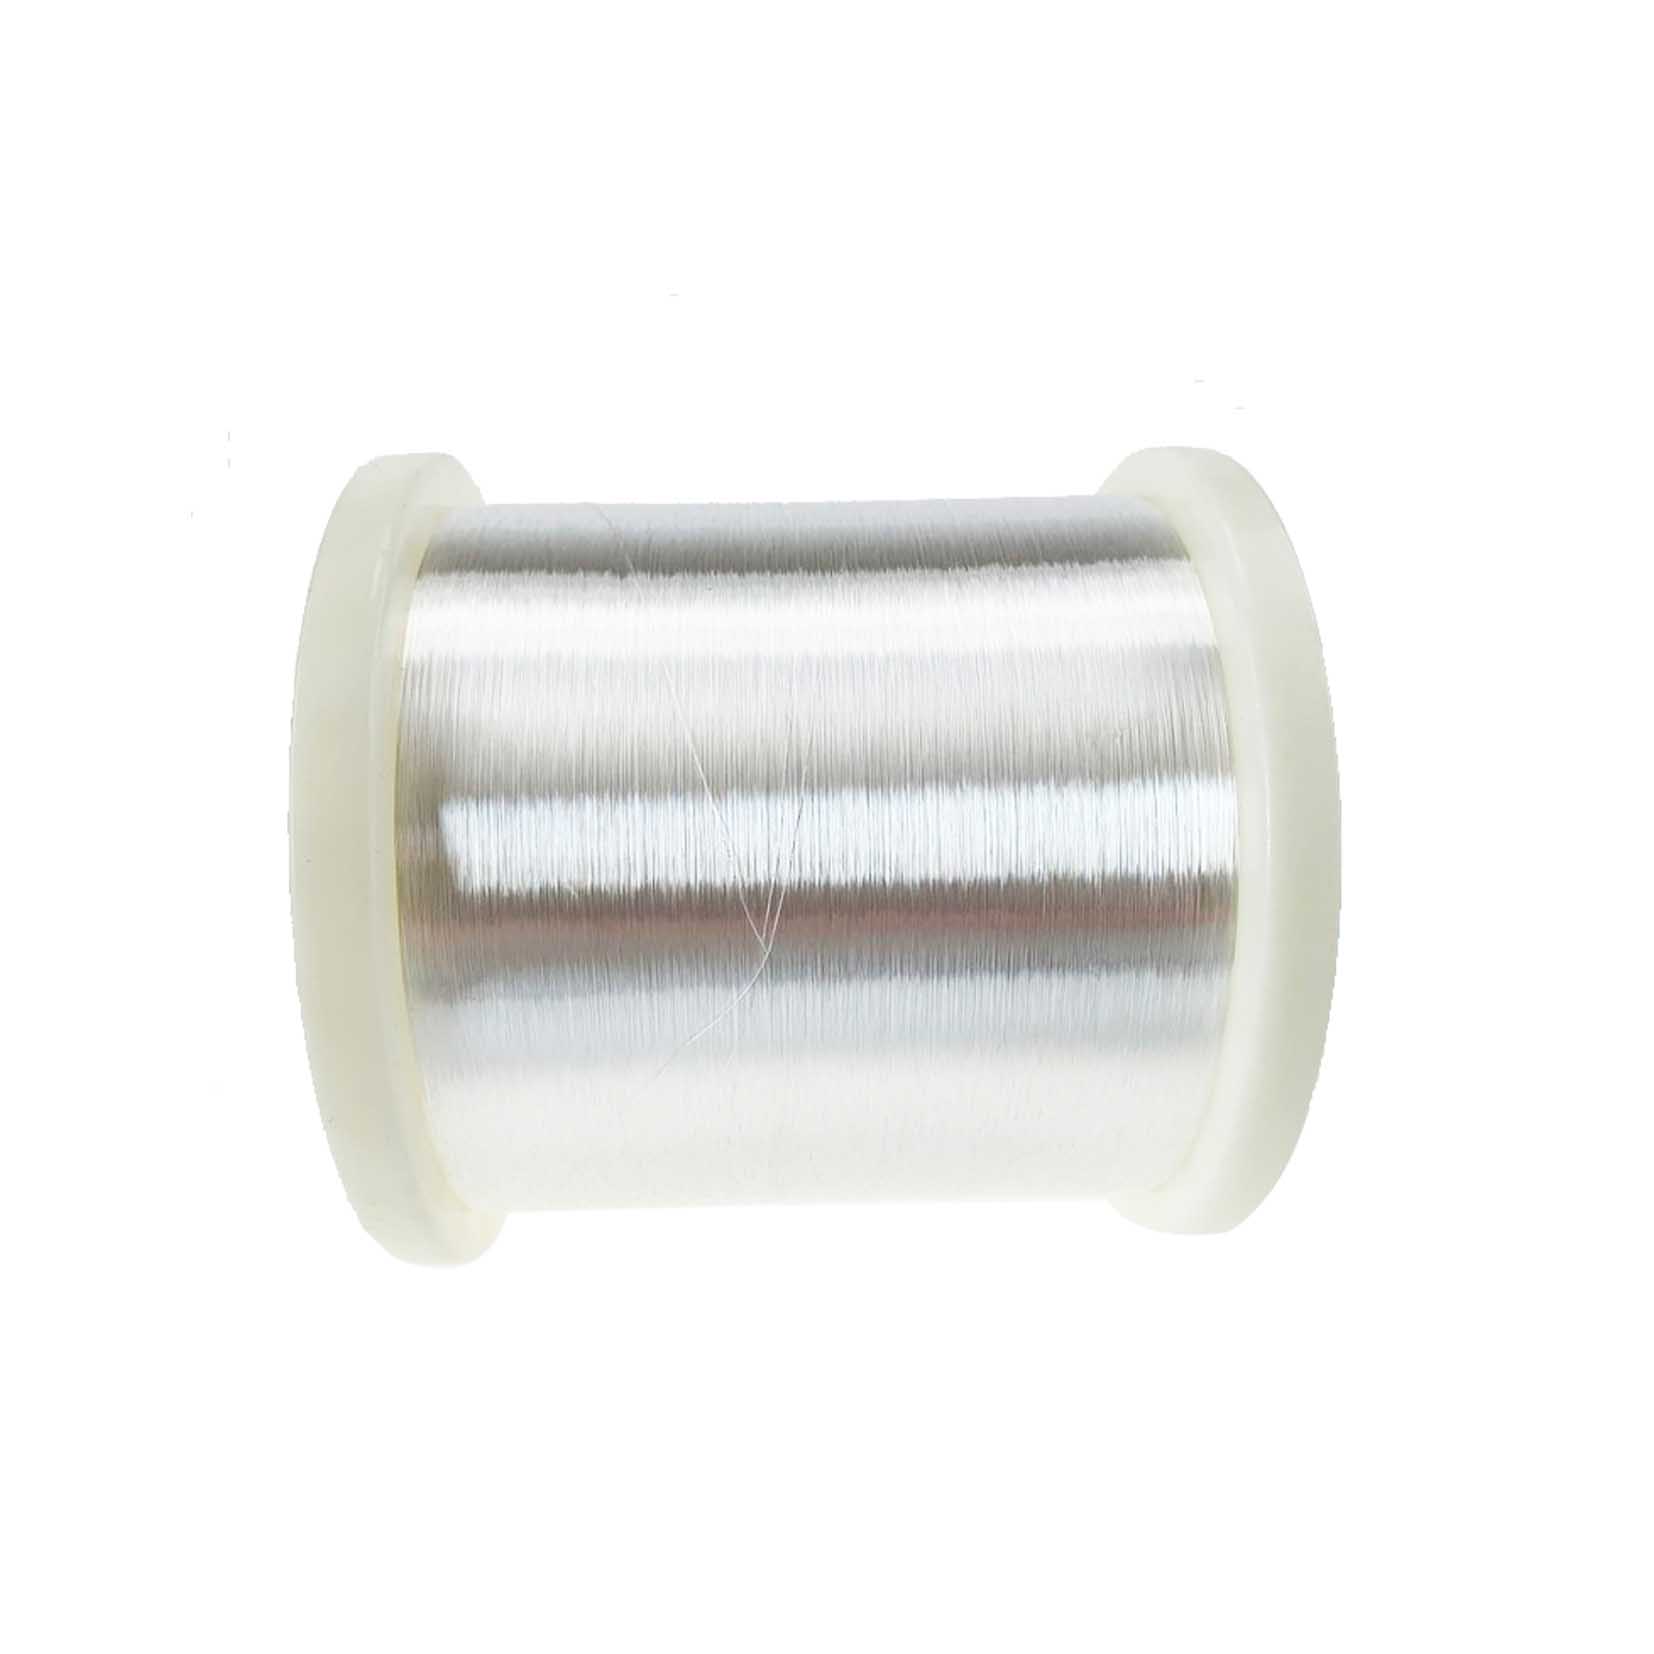 2019 Good Quality Silver Copper Conductor Wire -
 Manufacturer Supply Electric Material Silver Plated Copper Wire for Cable  – Tianchuang